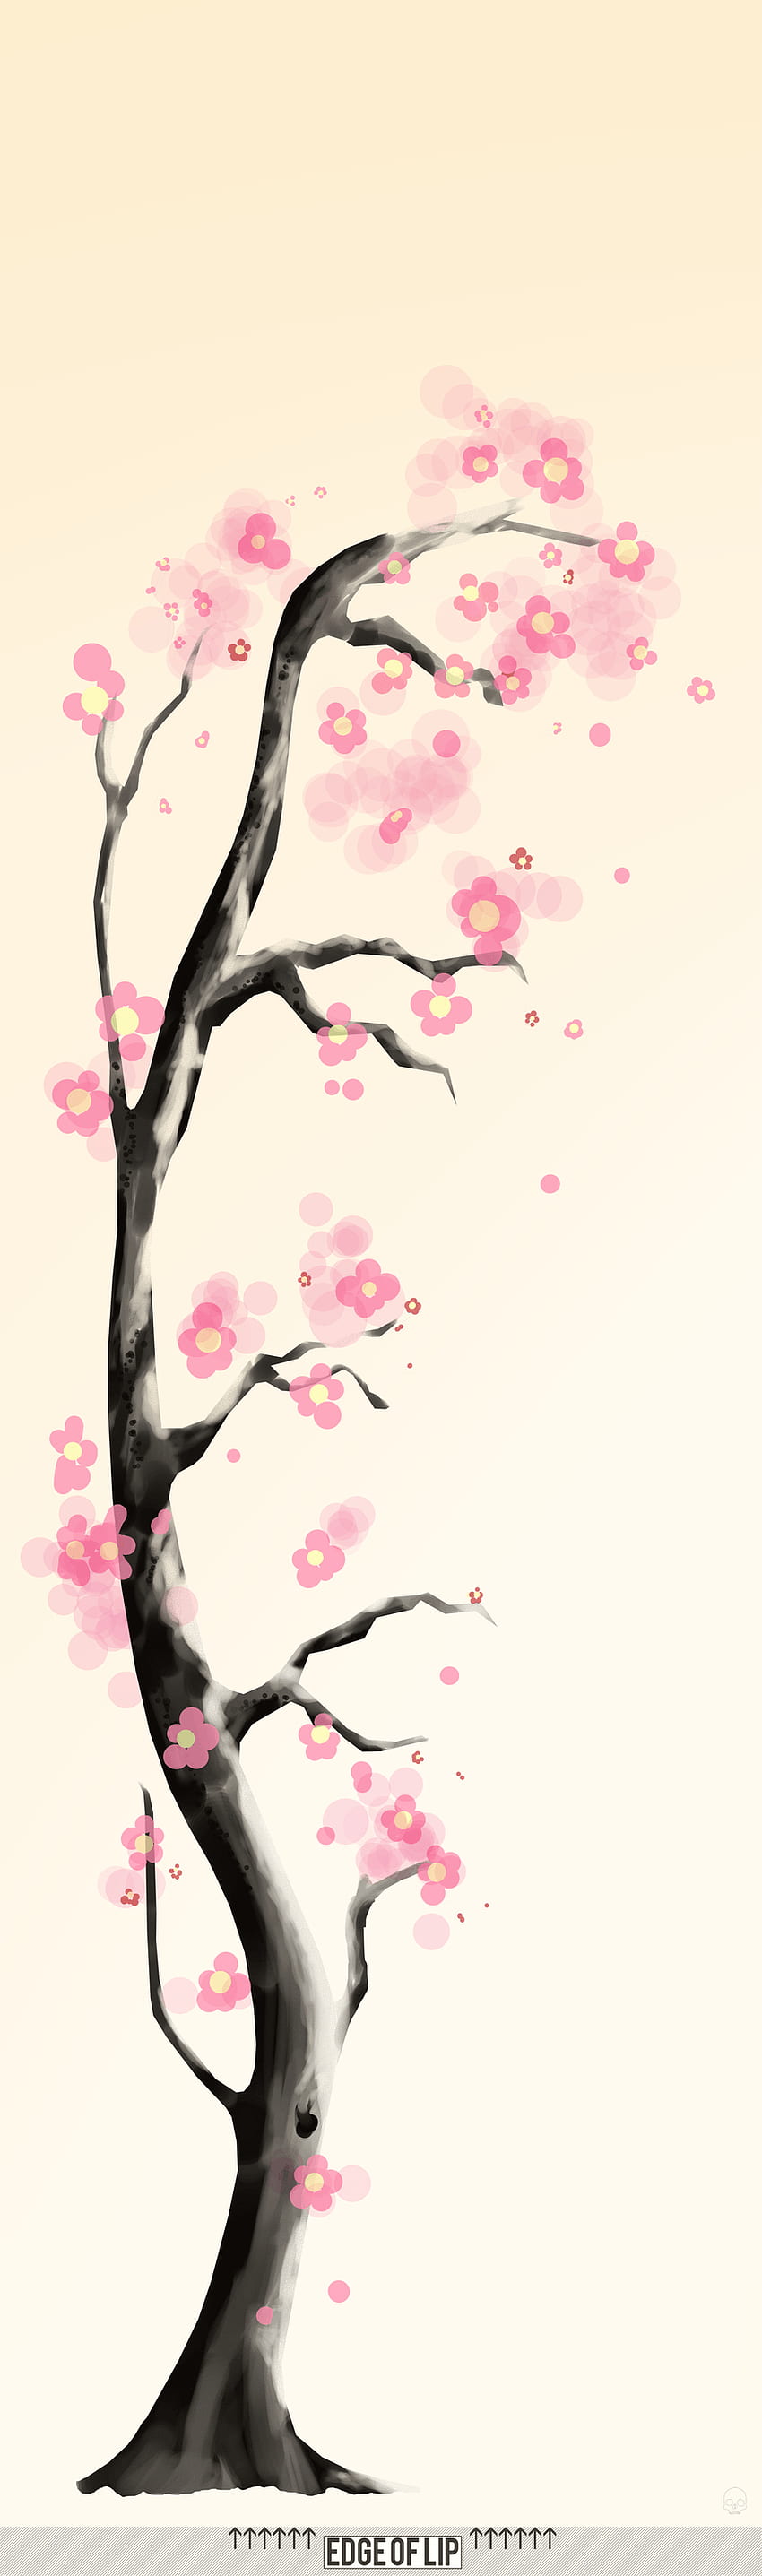 Decoration: Cute Cherry Blossom Wall Mural Black Branch By Mil0oz On HD phone wallpaper